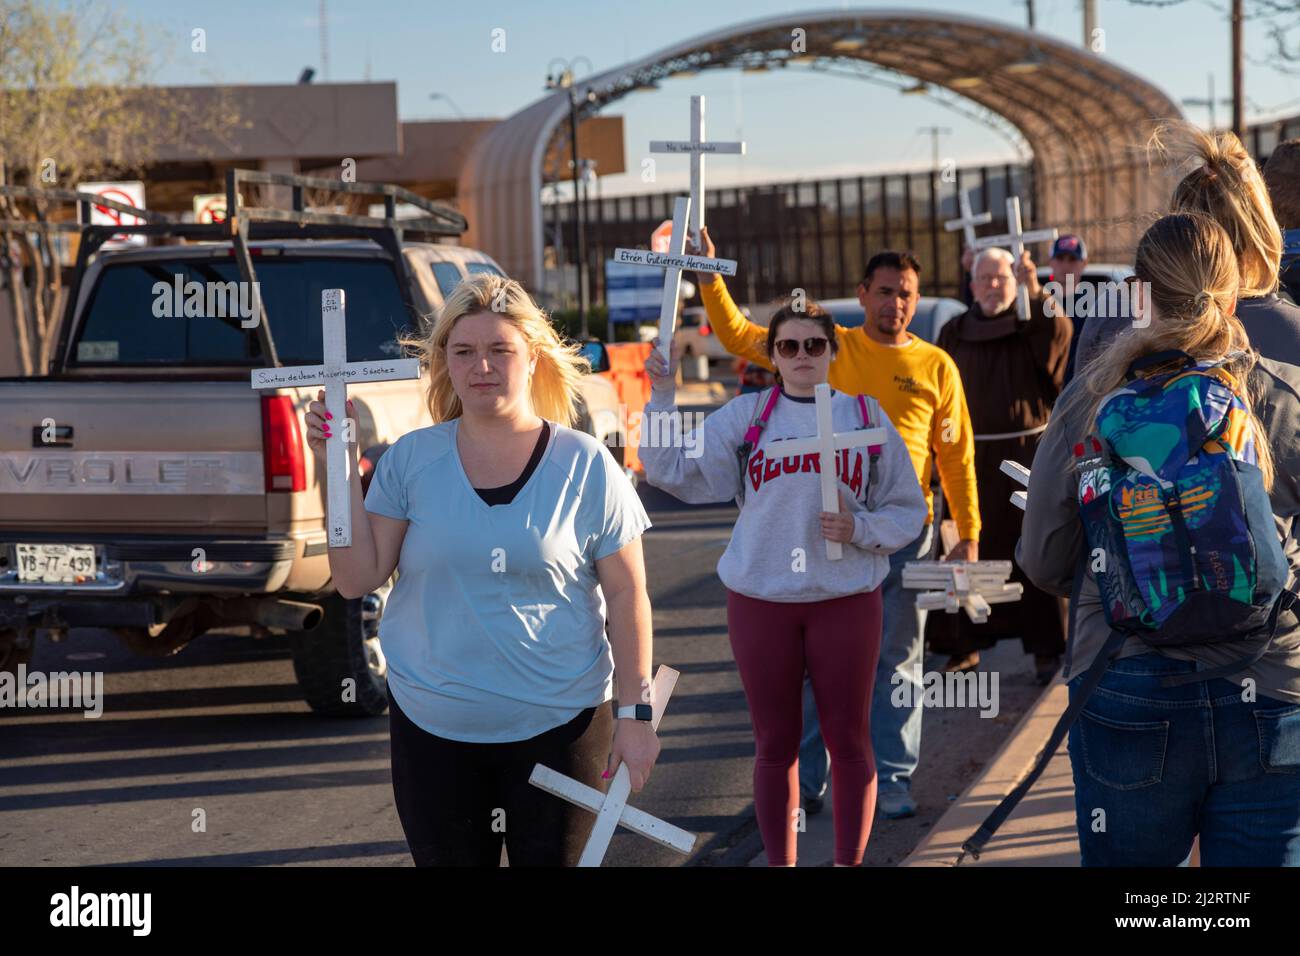 Douglas, Arizona - 'Healing Our Borders' prayer vigil remembers migrants who died crossing the U.S.-Mexico border. Three hundred bodies have been reco Stock Photo